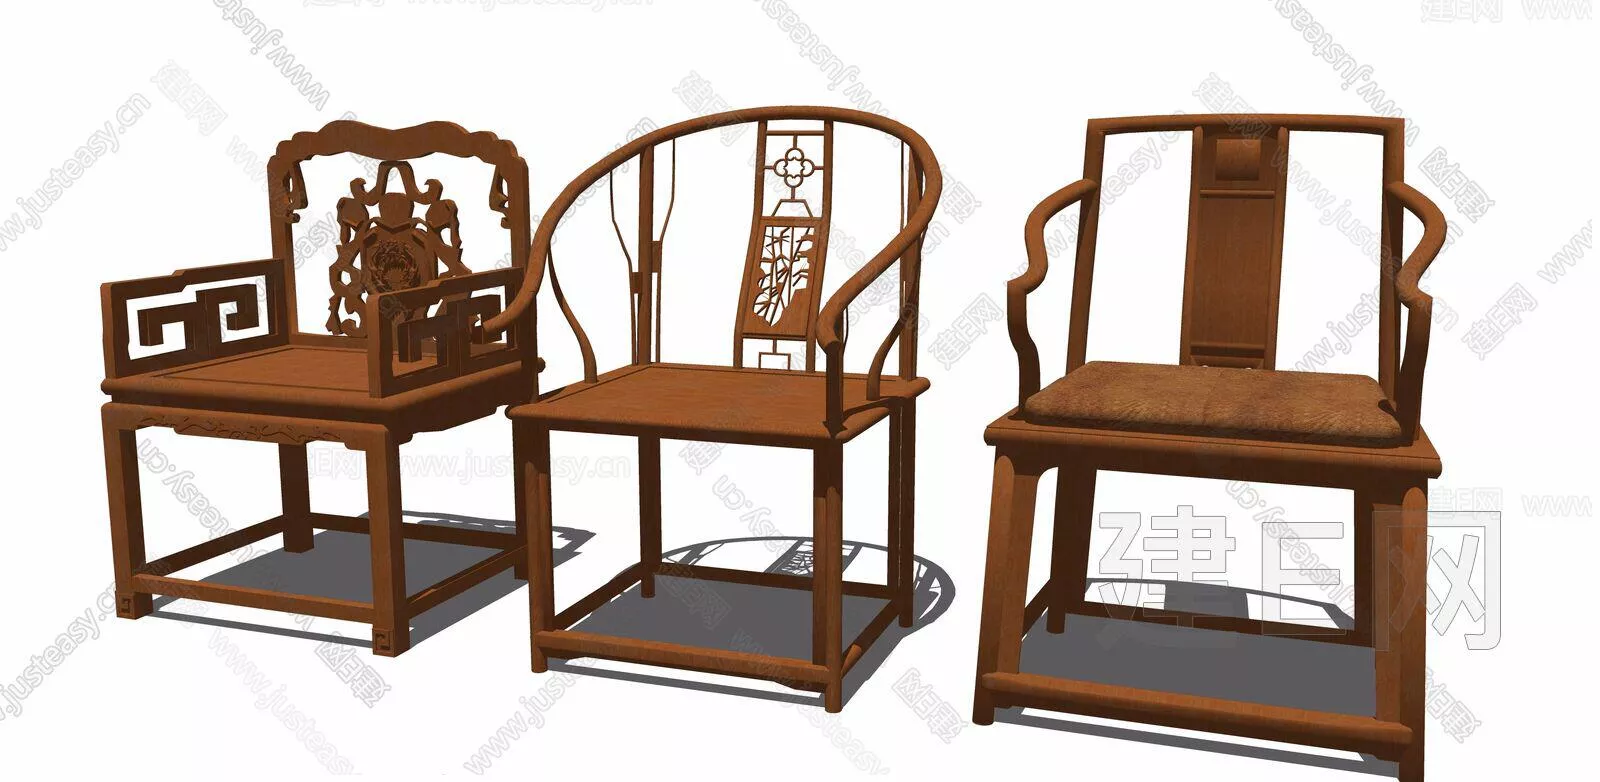 CHINESE OFFICE CHAIR - SKETCHUP 3D MODEL - ENSCAPE - 105857309